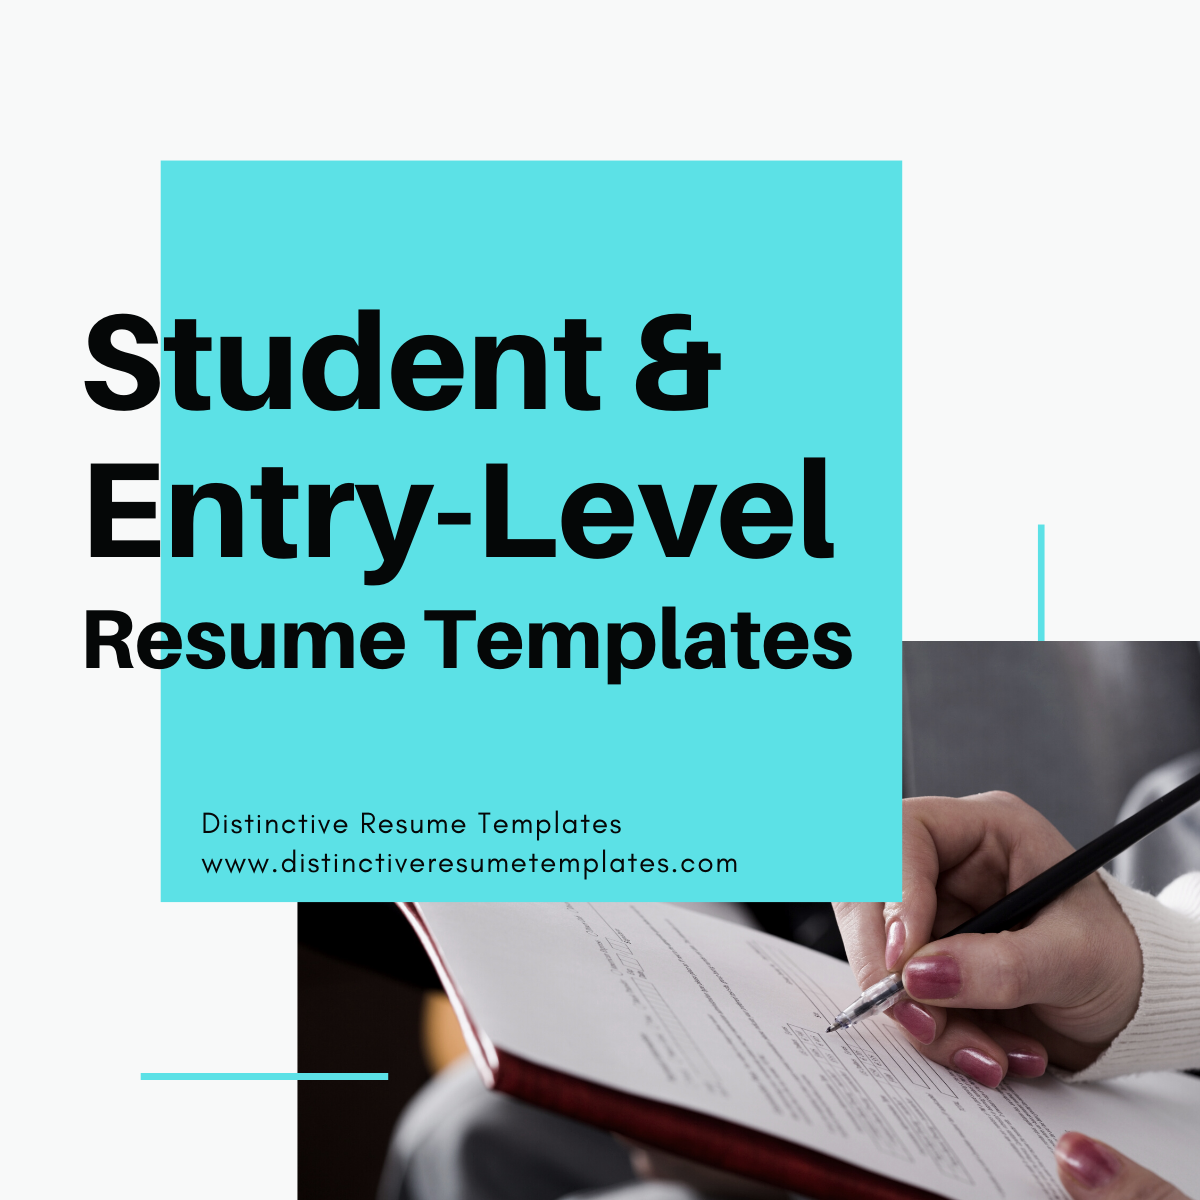 Entry-Level Resume Templates for Students and Other Young Professionals